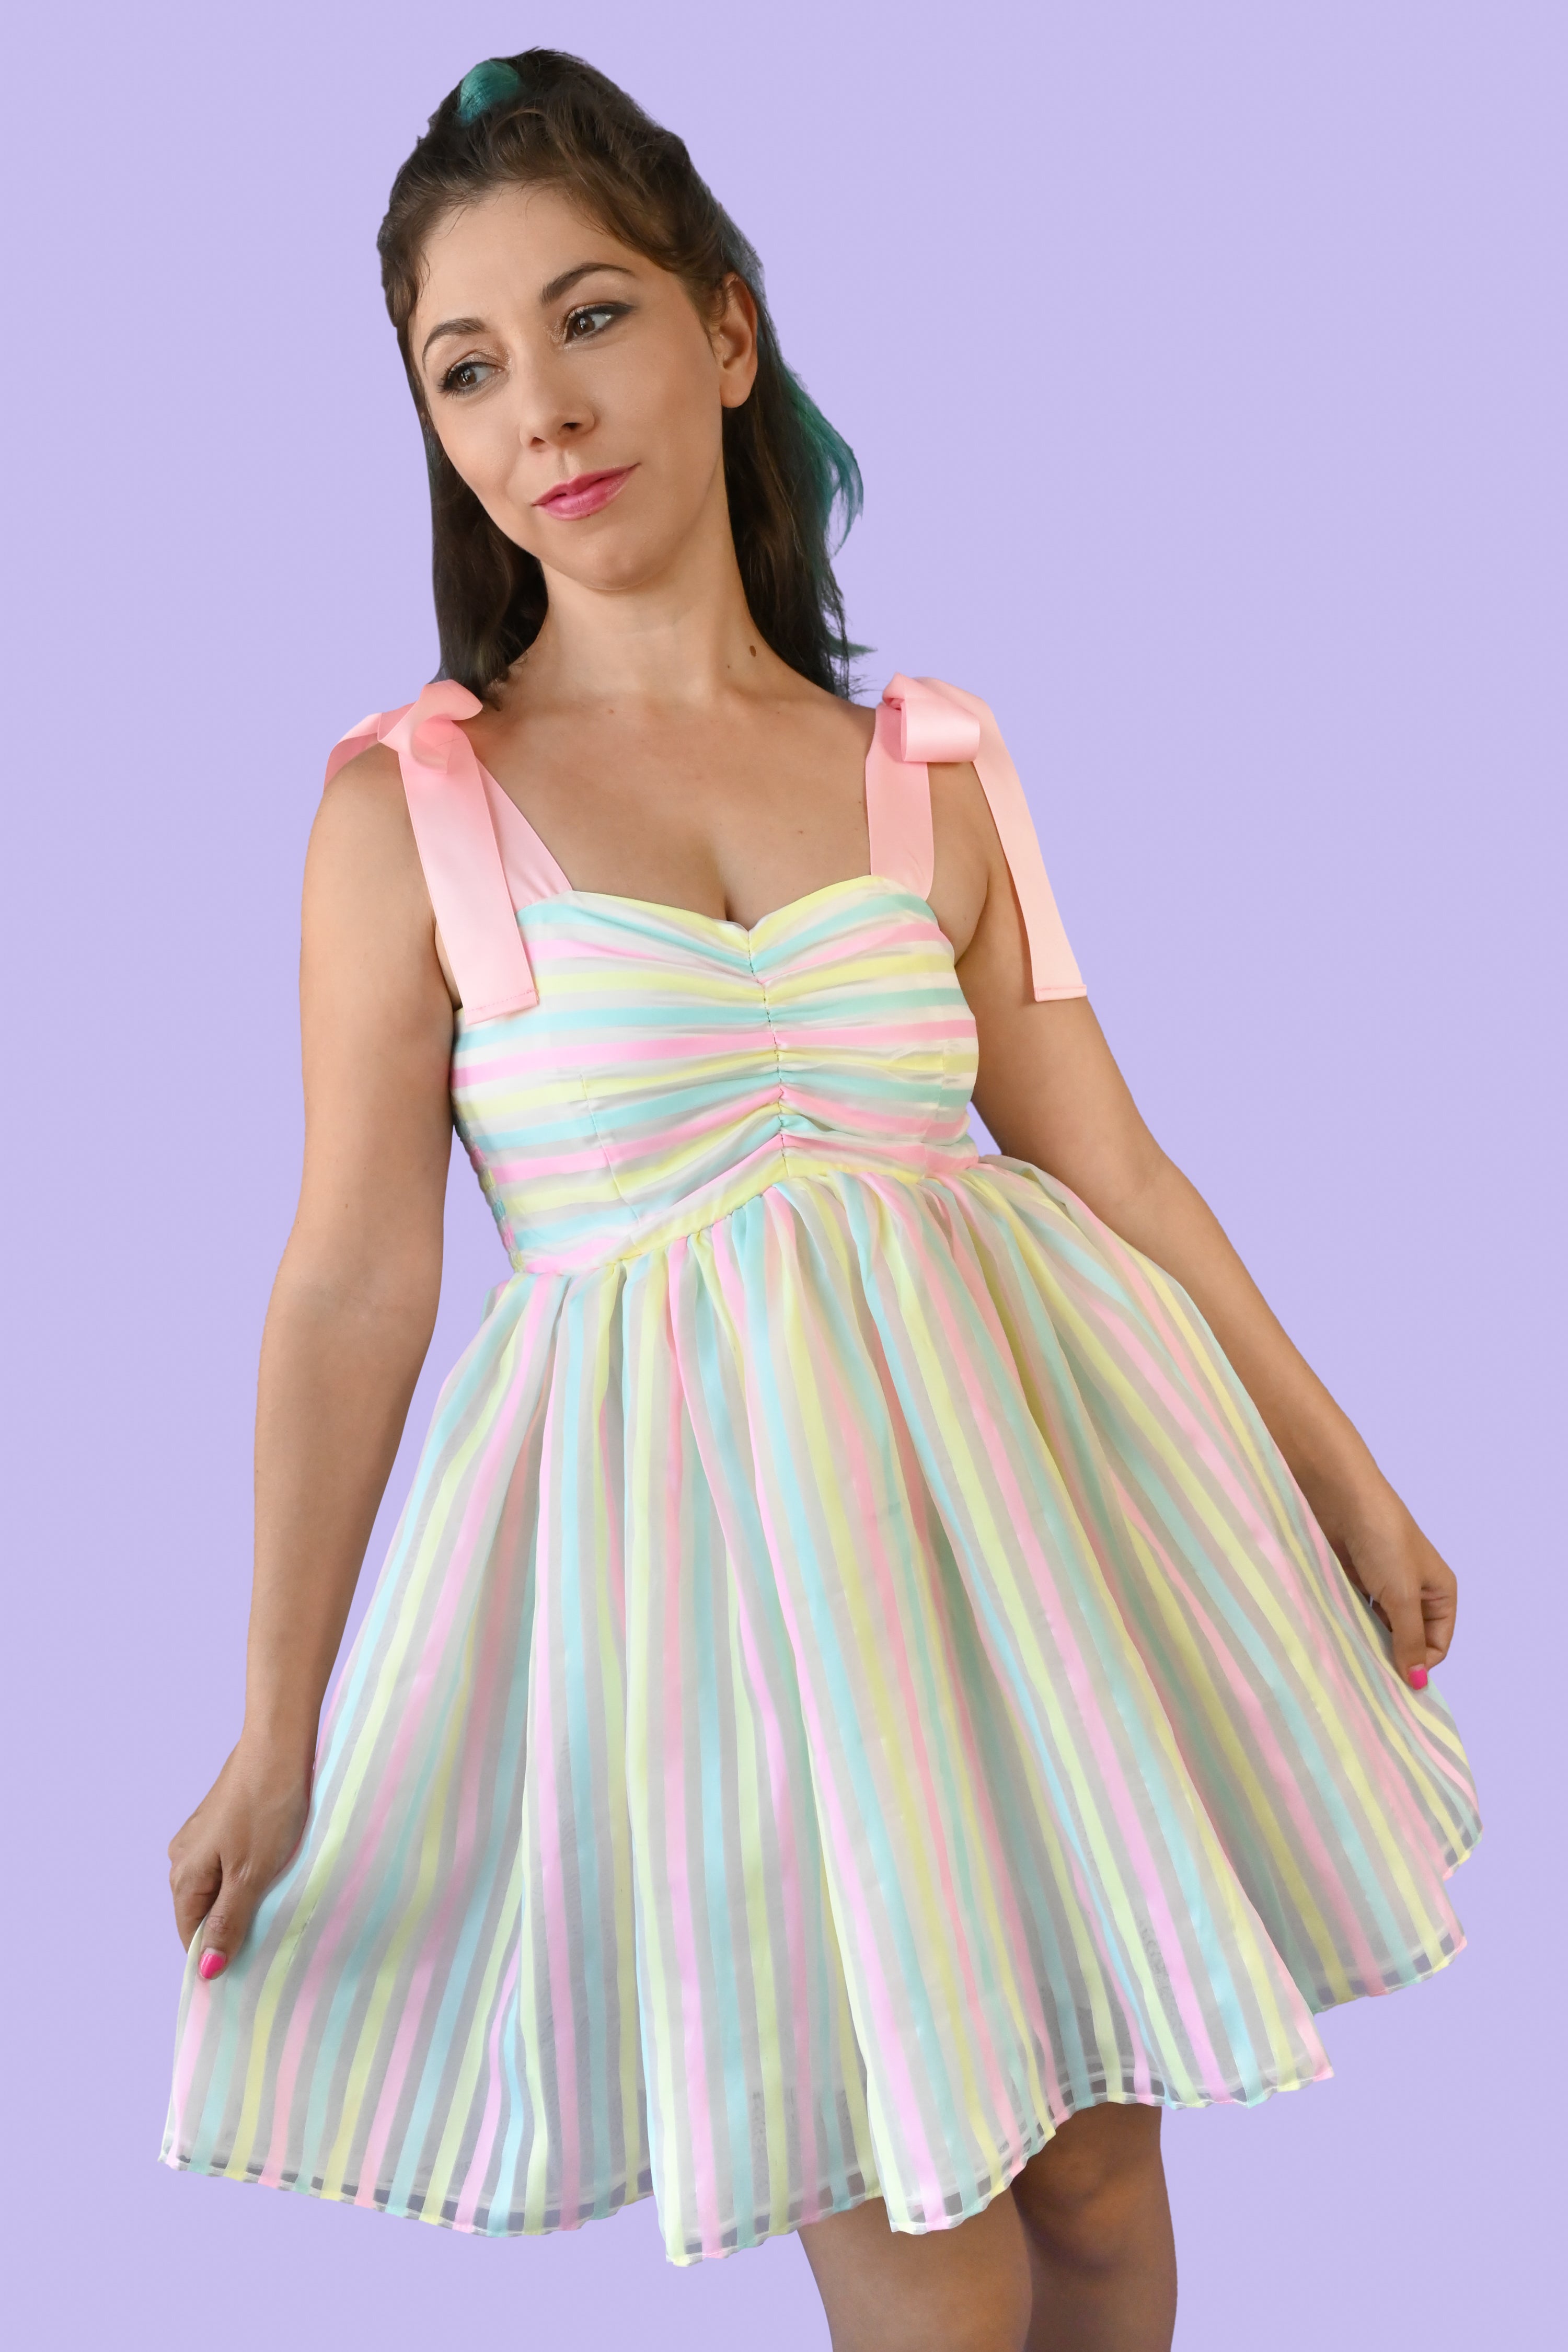 Pink ribbon straps, horizontal pastel yellow, blue, and pink stripes on the ruched bodice and a cupcake style sheer vertical striped skirt over a white slip